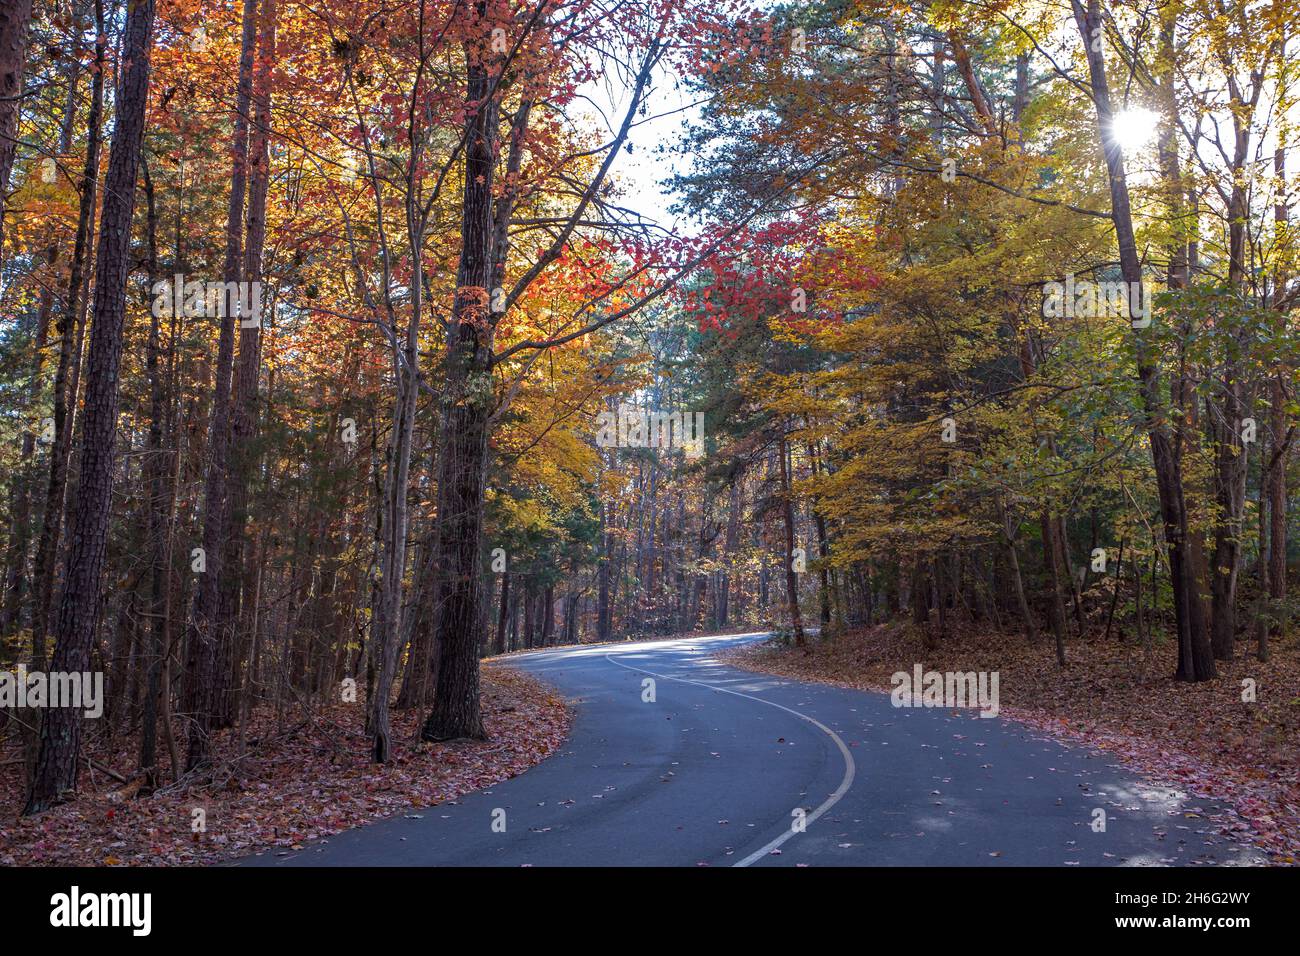 The late afternoon sun shines through colorful fall leaves on a winding country road. Stock Photo